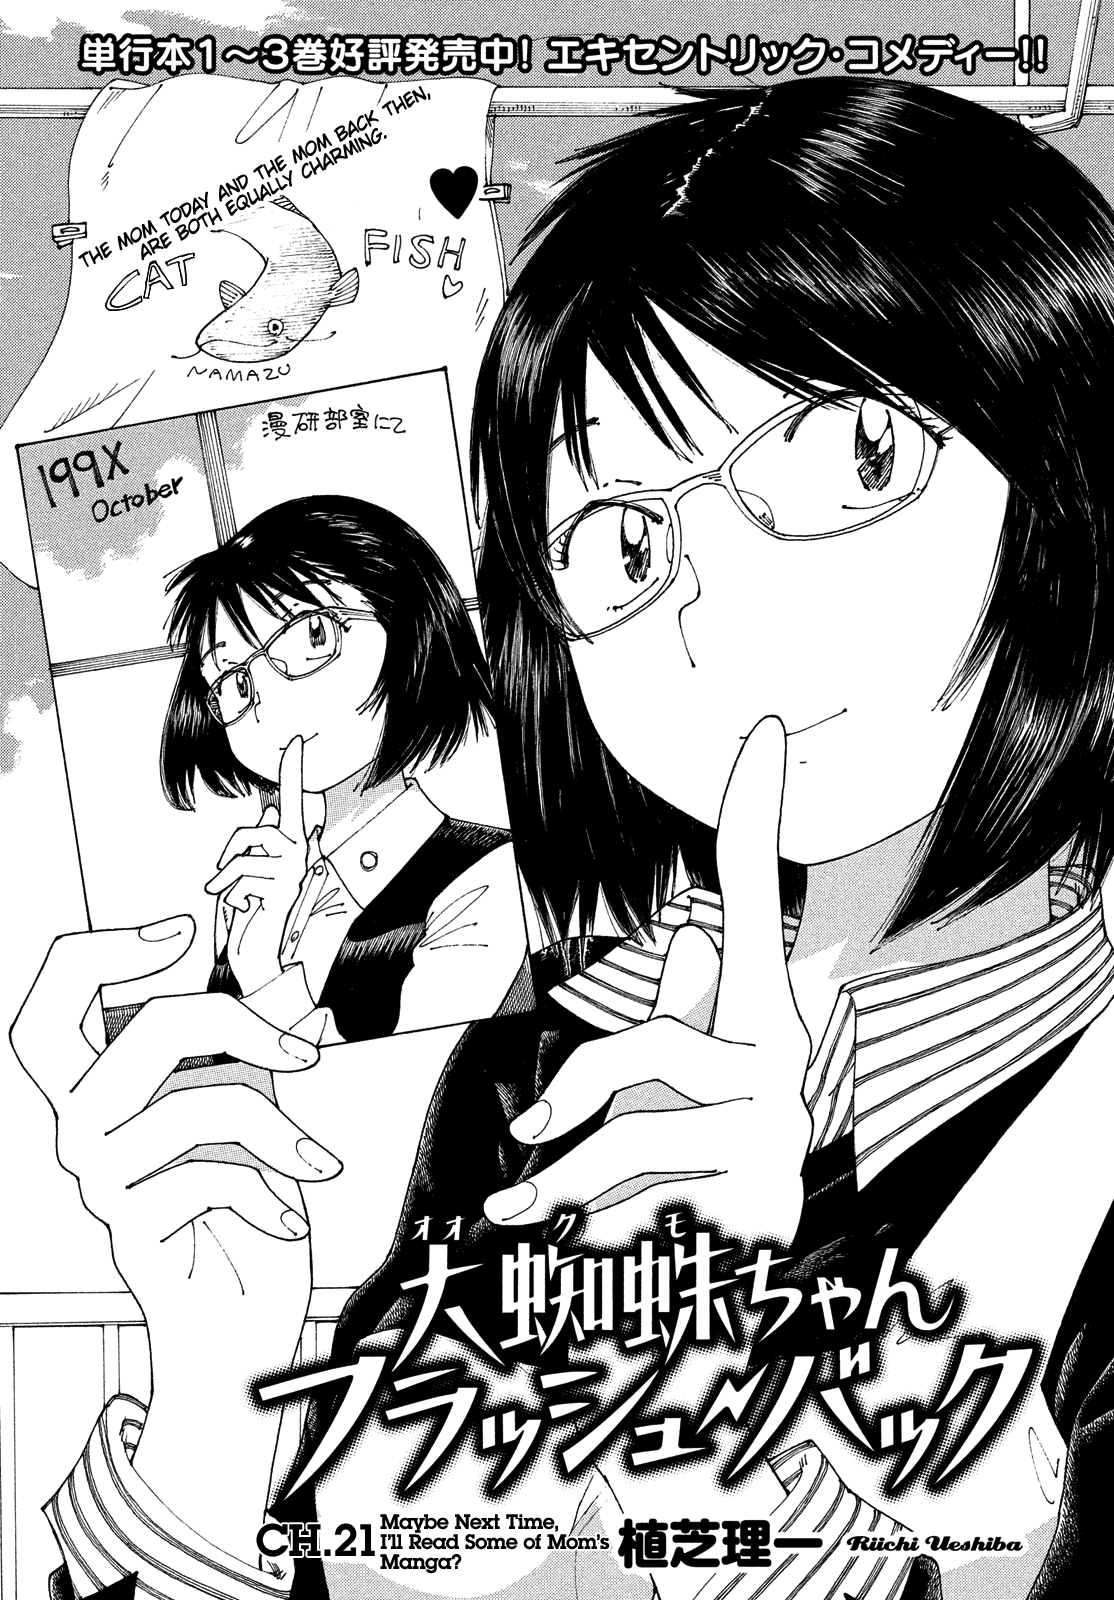 Ookumo chan Flashback Vol. 4 Ch. 21 Maybe Next Time, I'll Read Some Of Mom's Manga?